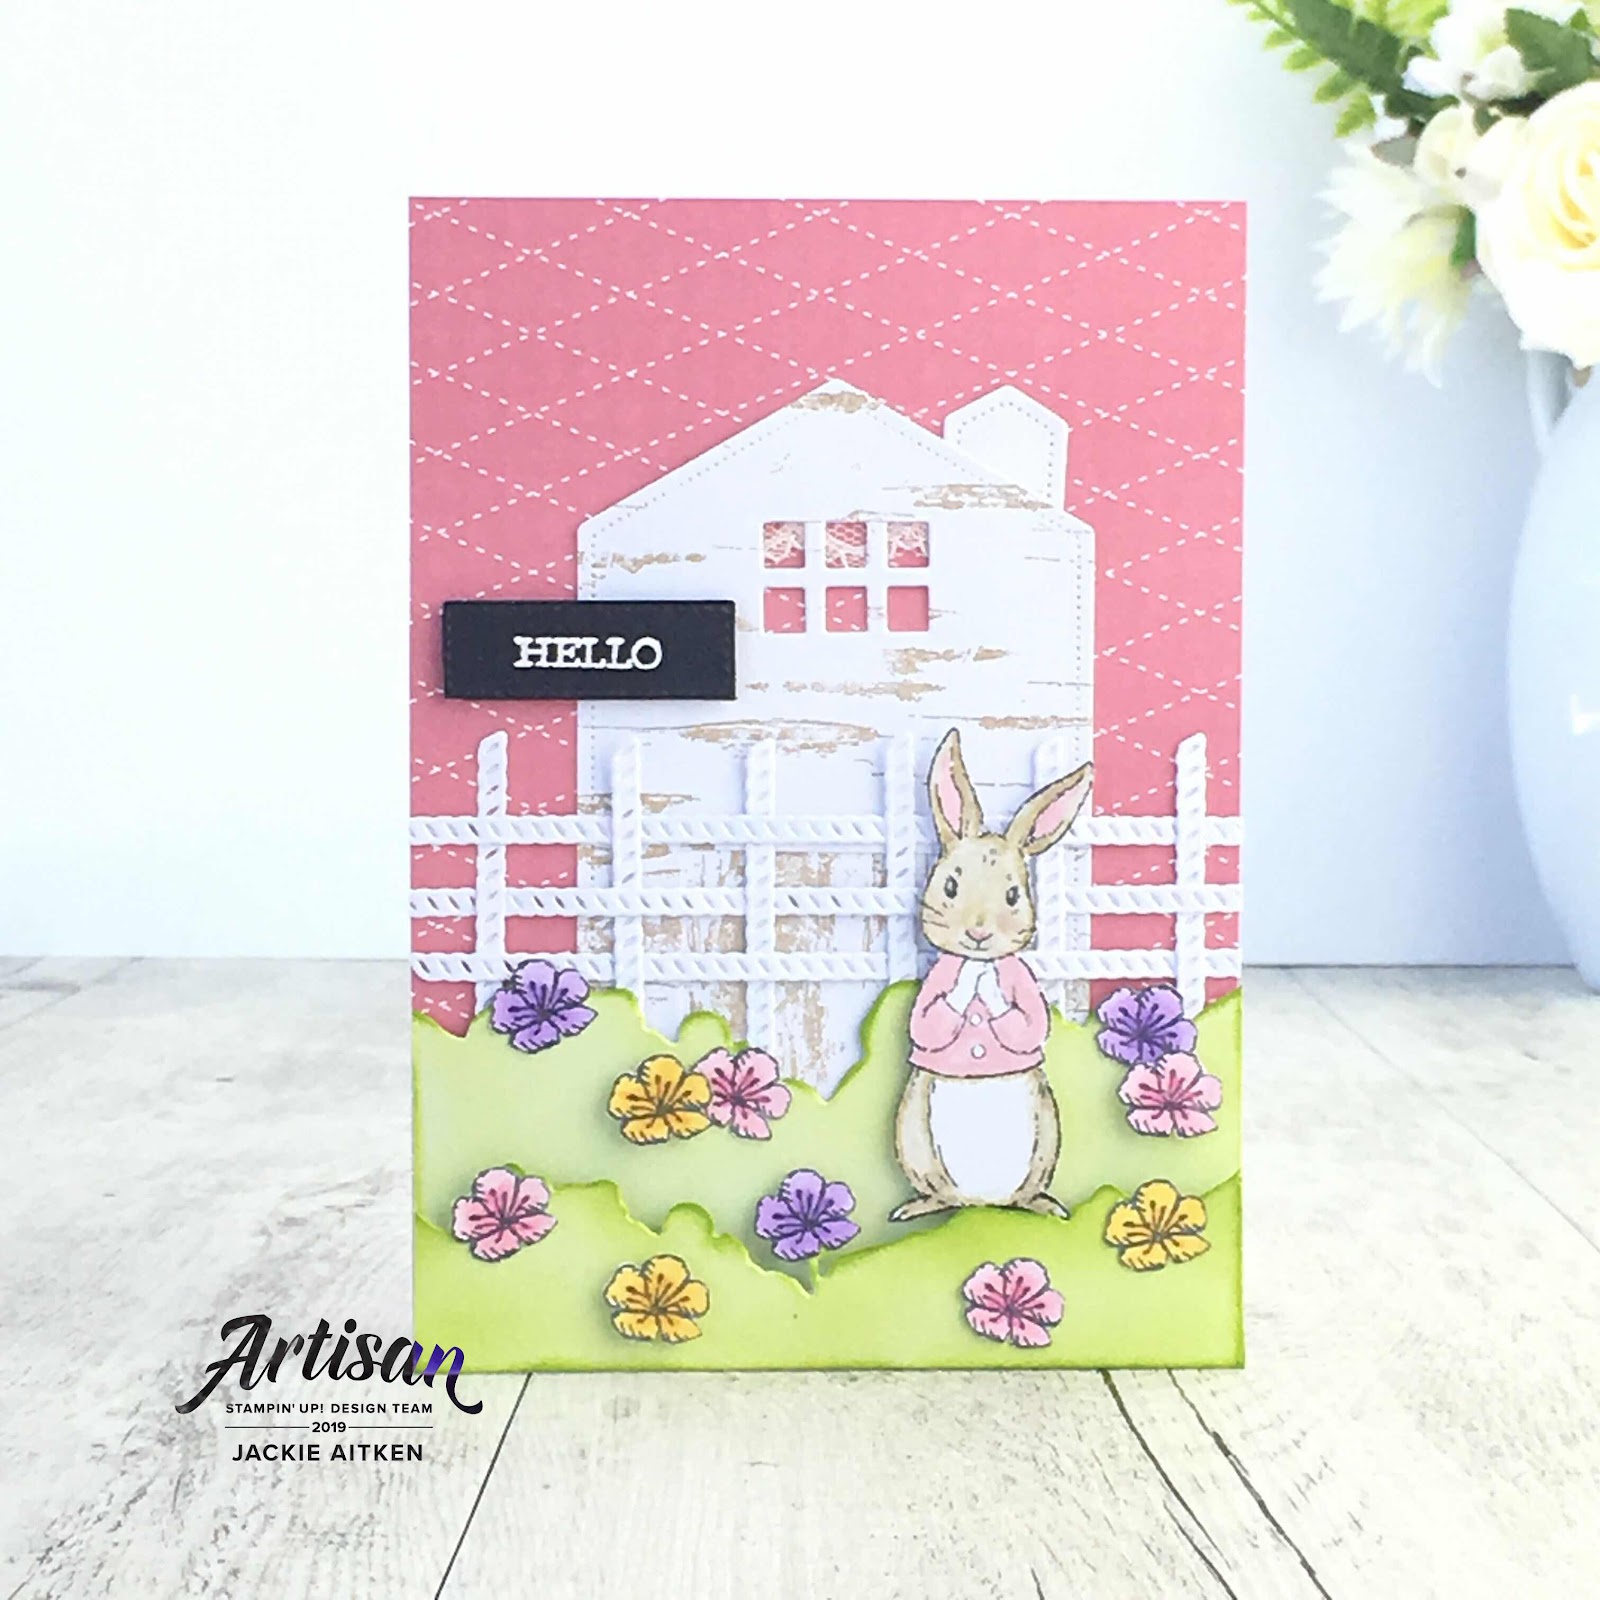 jaxx crafty creations, Farm Theme, One Stamp At A Time Blog Hop, Fable Friends, Free As A Bird, Smooth Sailing, Birch Background Stamp, Bunny Card, stampin up